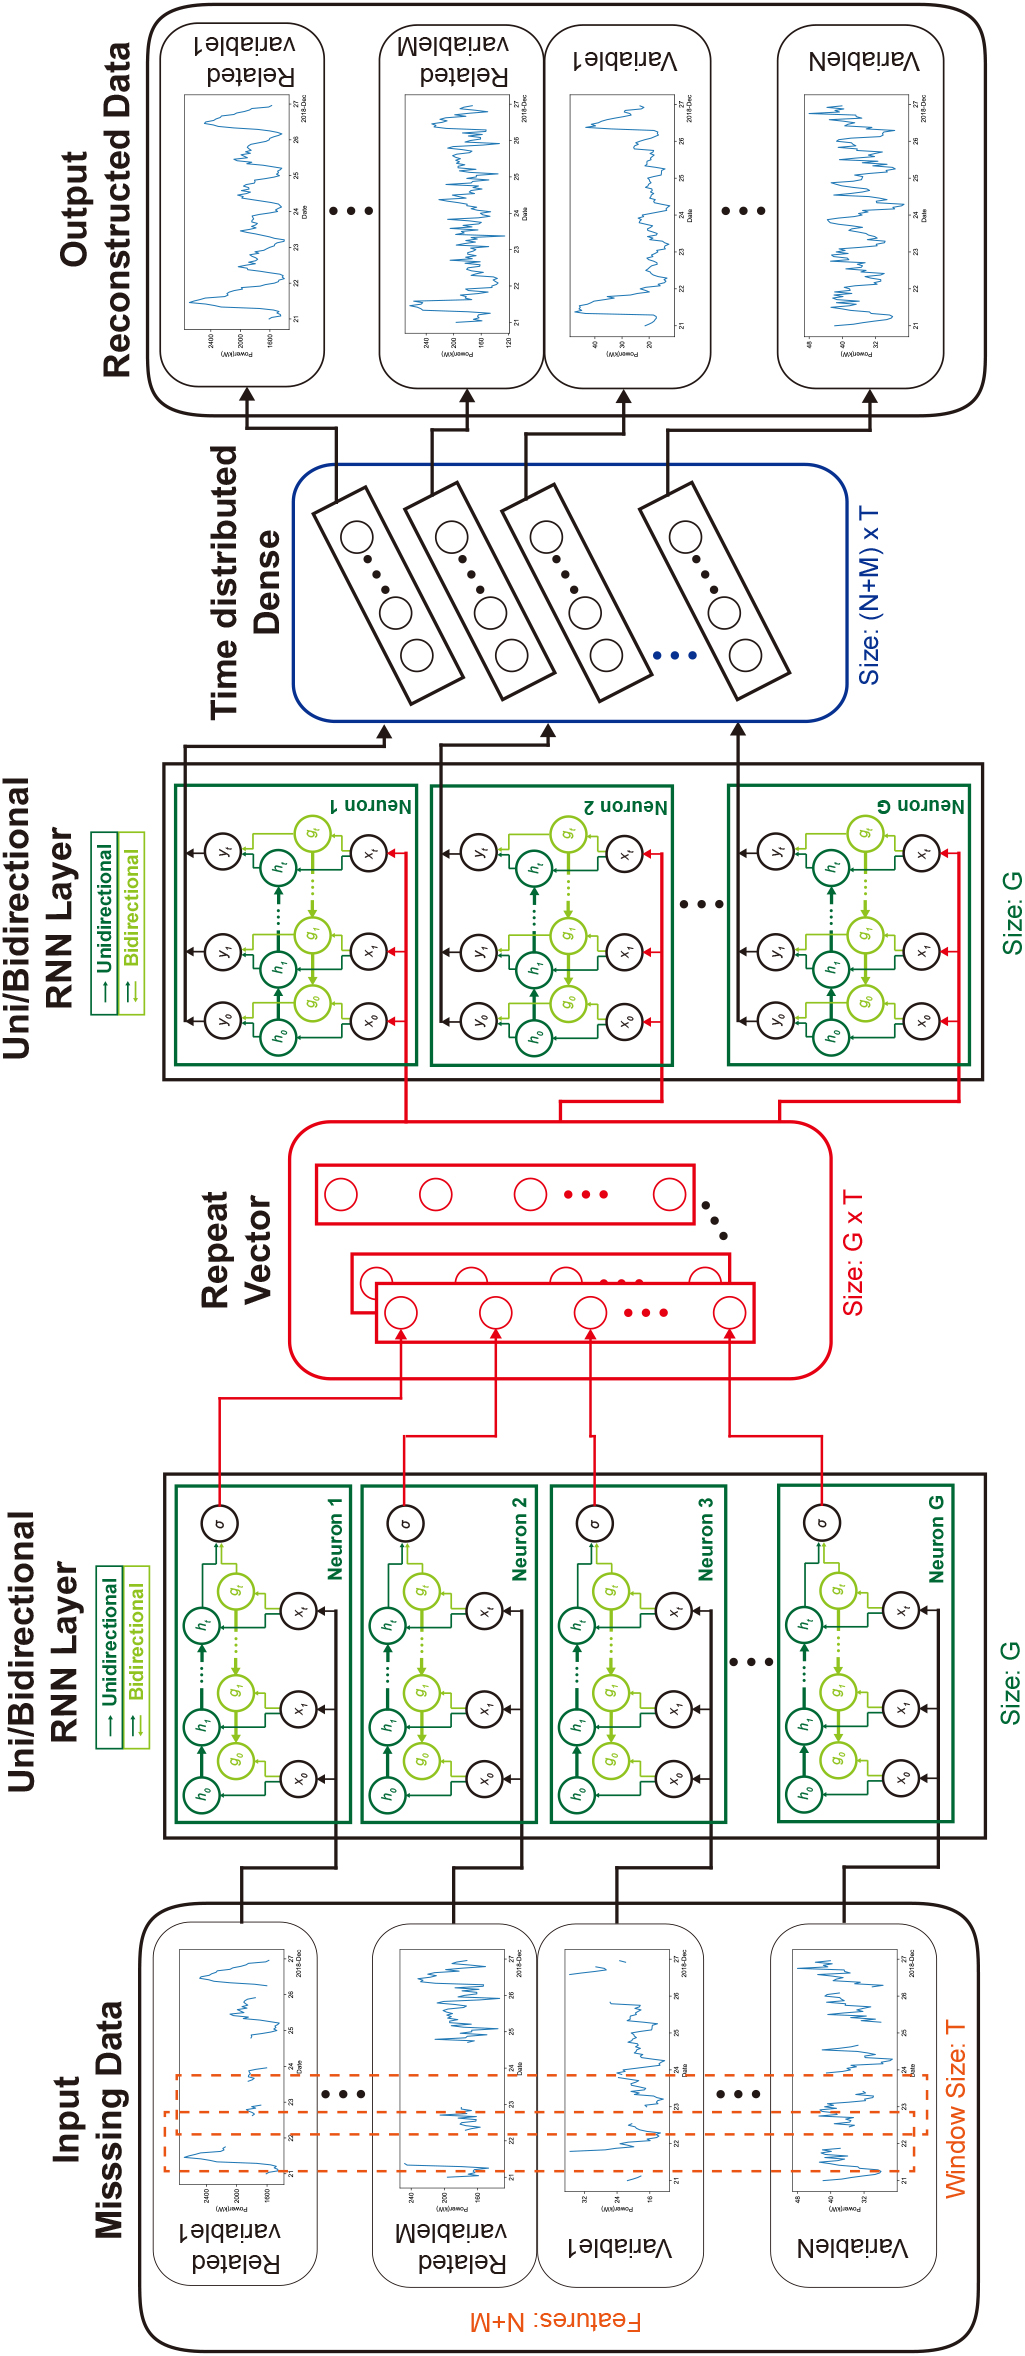 Architecture of the recurrent neural network-based denoising autoencoder.